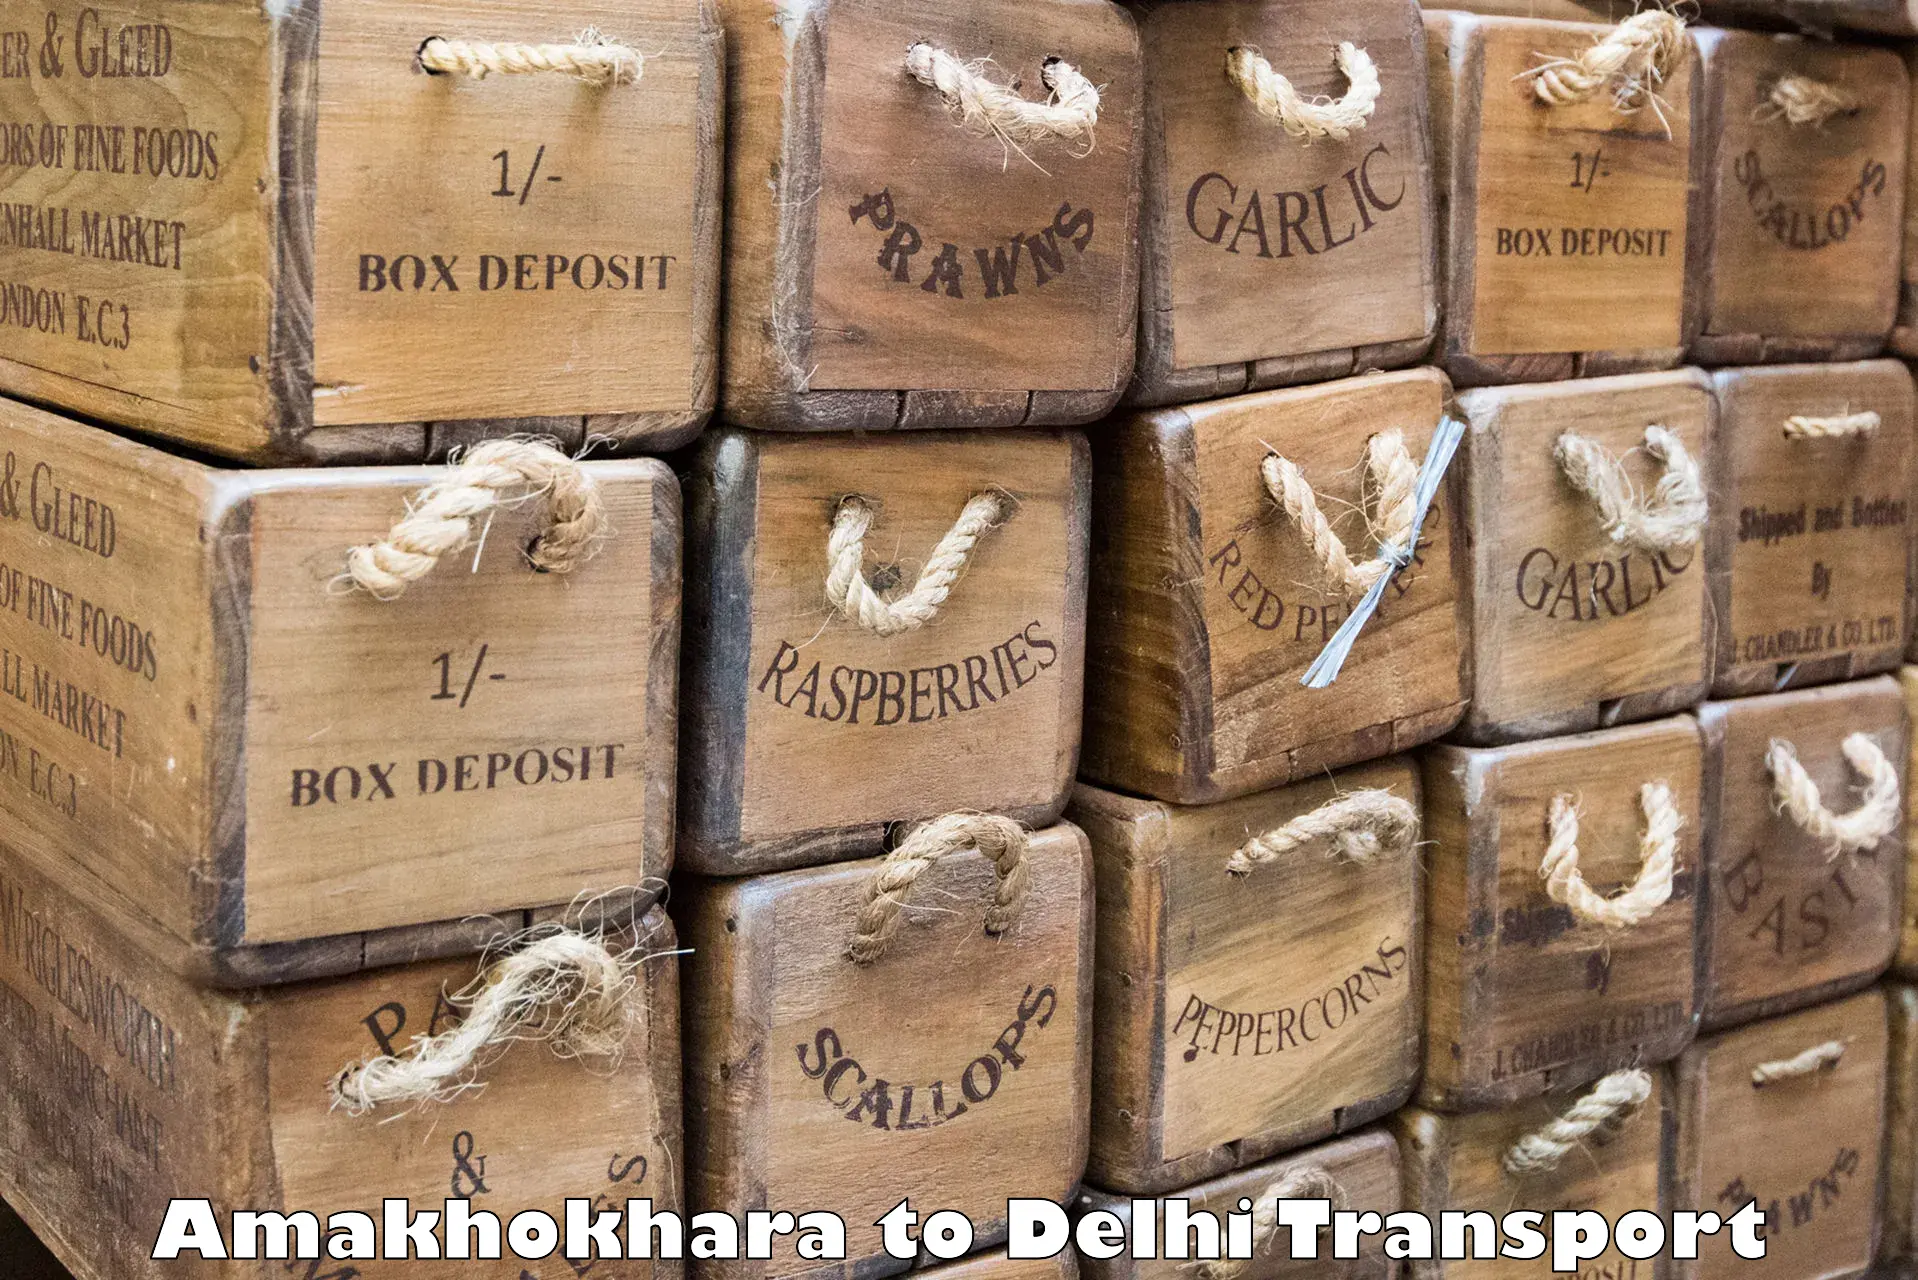 Shipping services in Amakhokhara to NCR